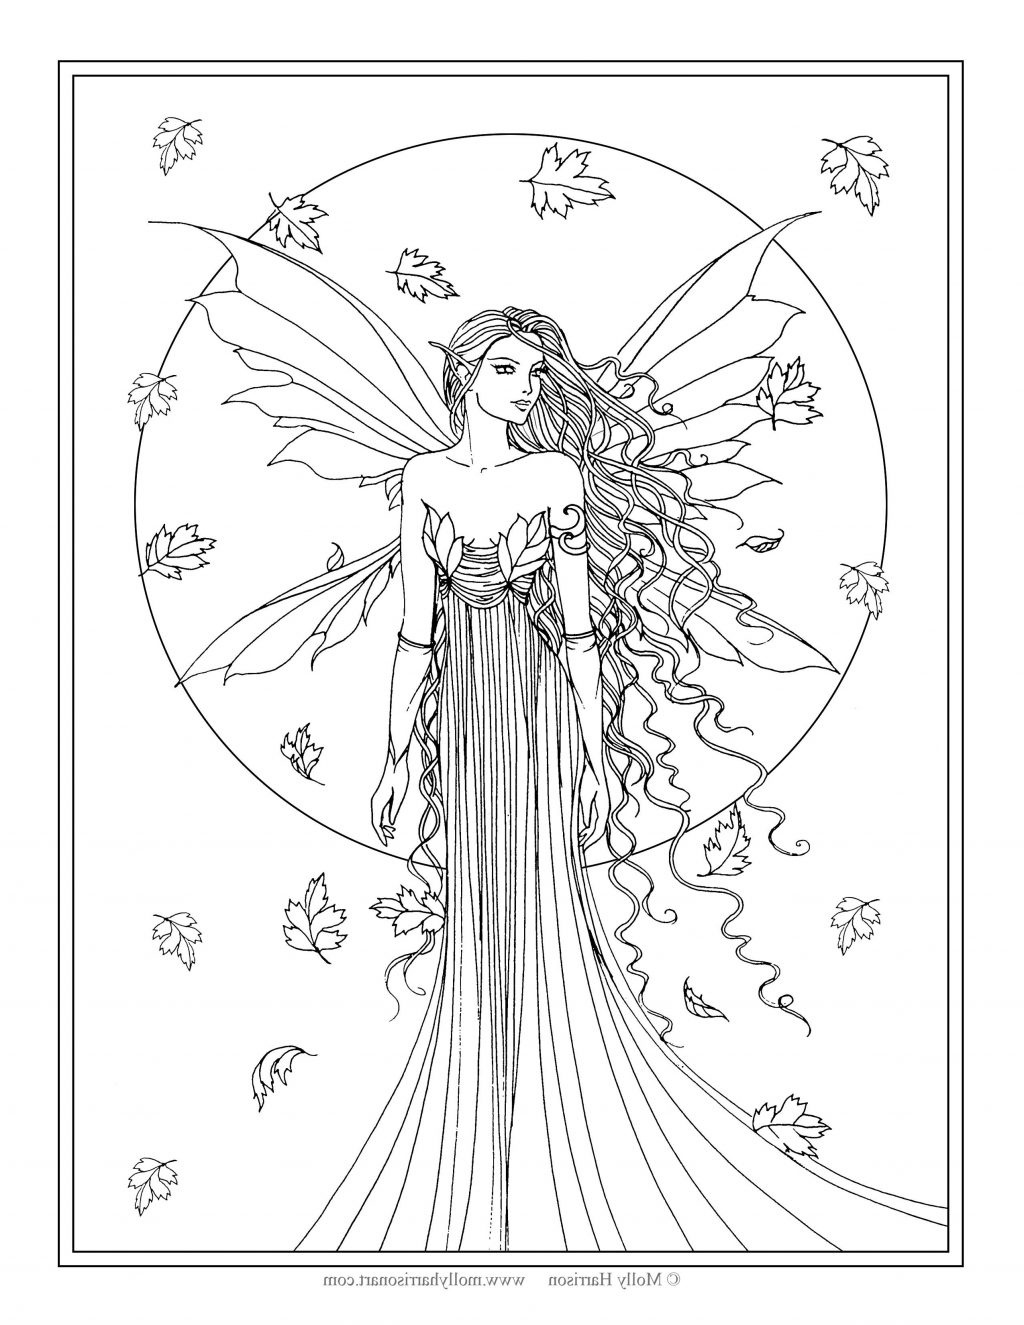 Coloring Page ~ Fairy Coloring Pages For Adults Free Printable - Free Printable Coloring Pages Fairies Adults